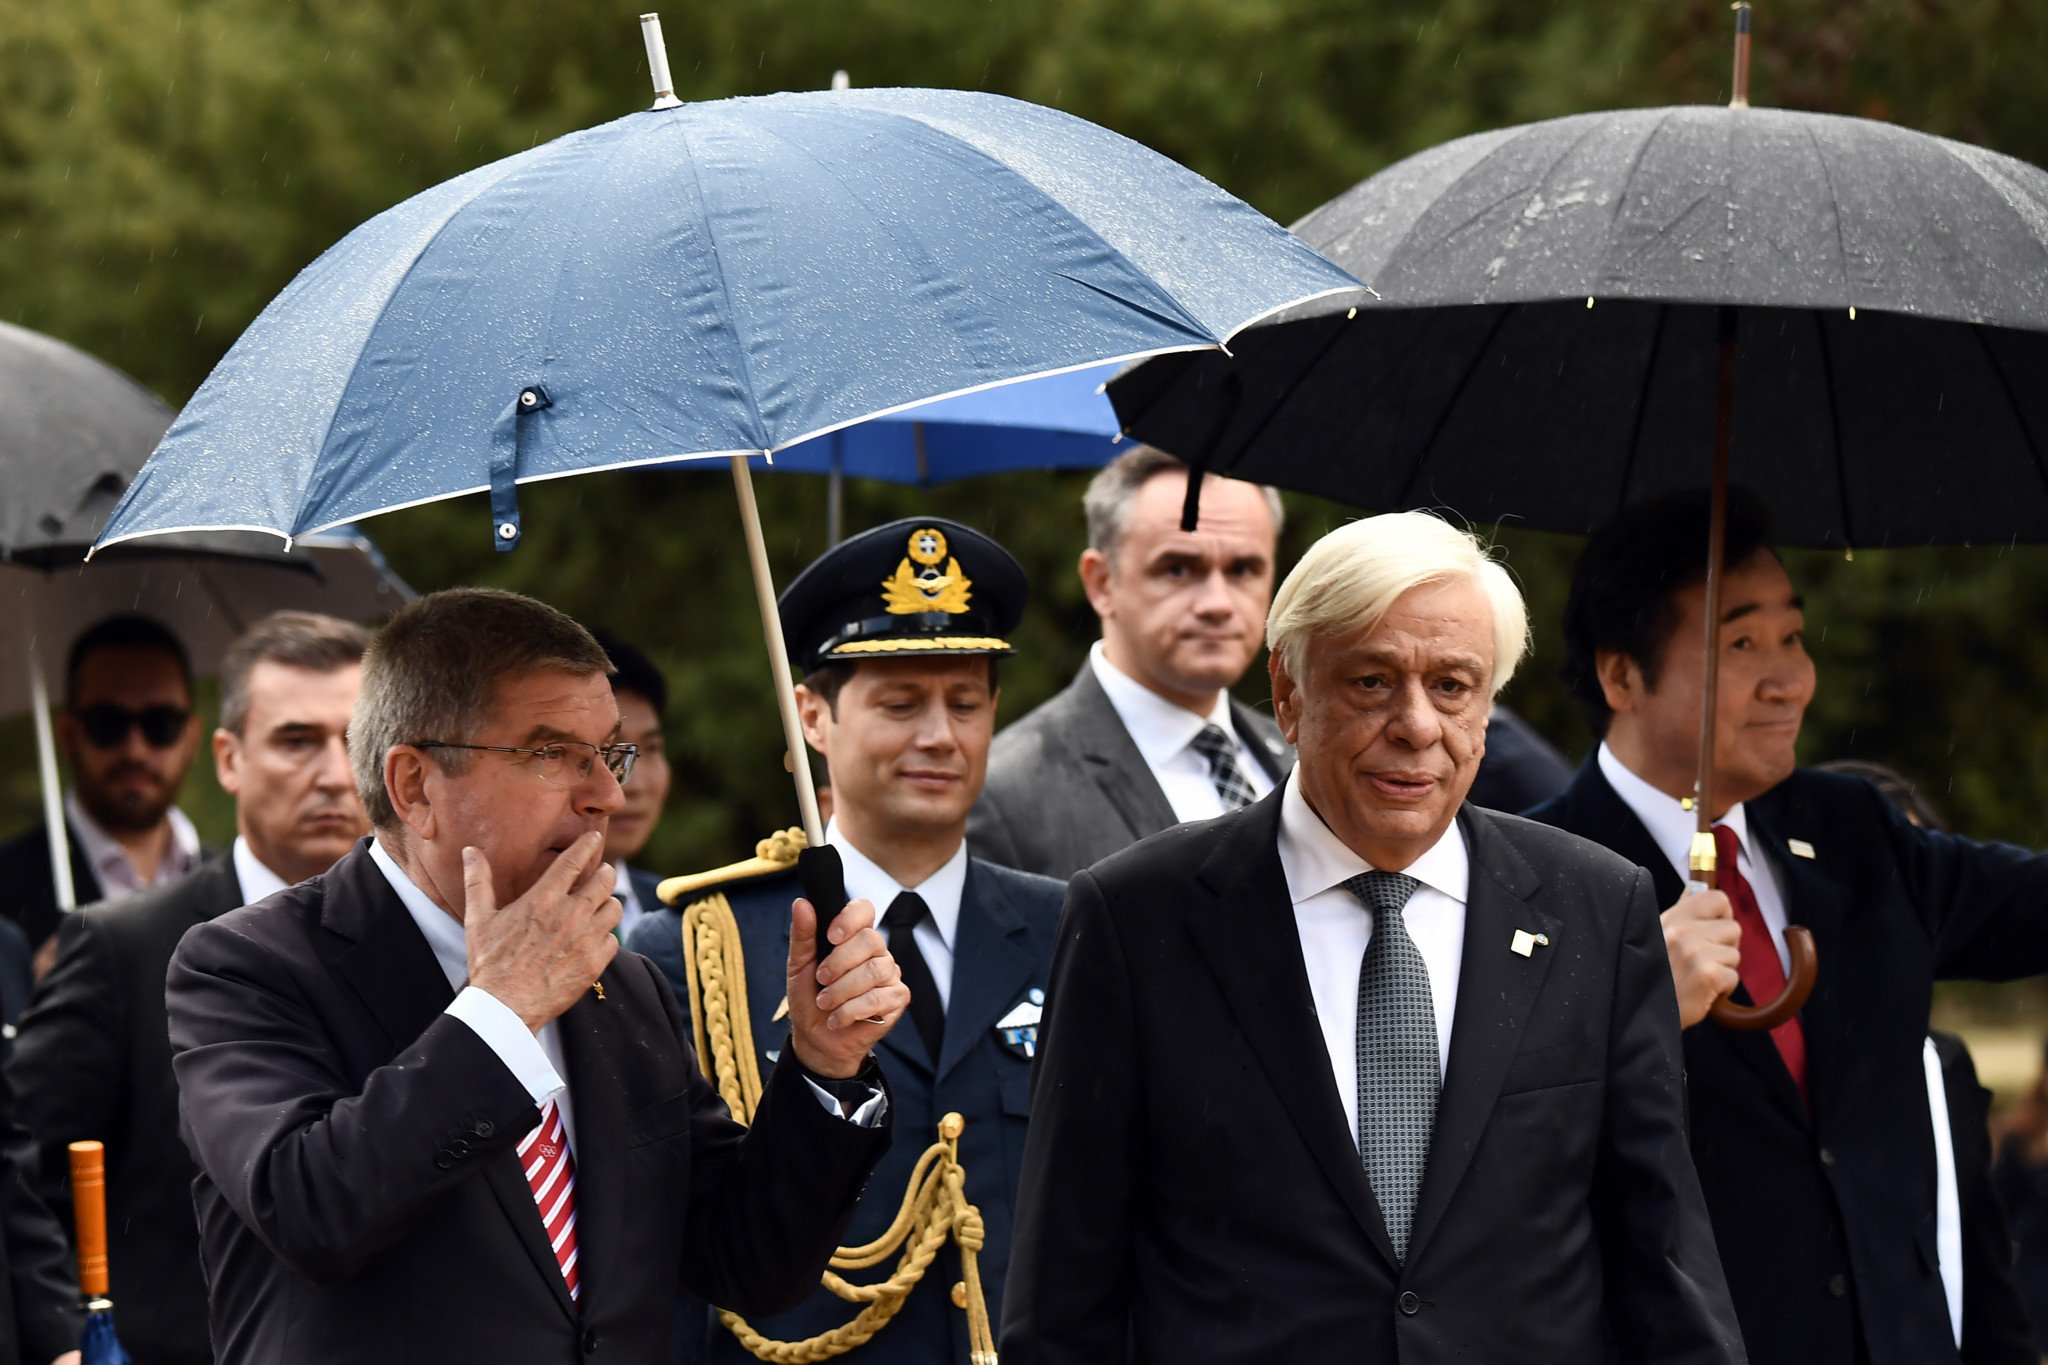 Greek President Prokopis Pavlopoulos, right, and President of the International Oympic Committee Thomas Bach were among the guests ©Getty Images